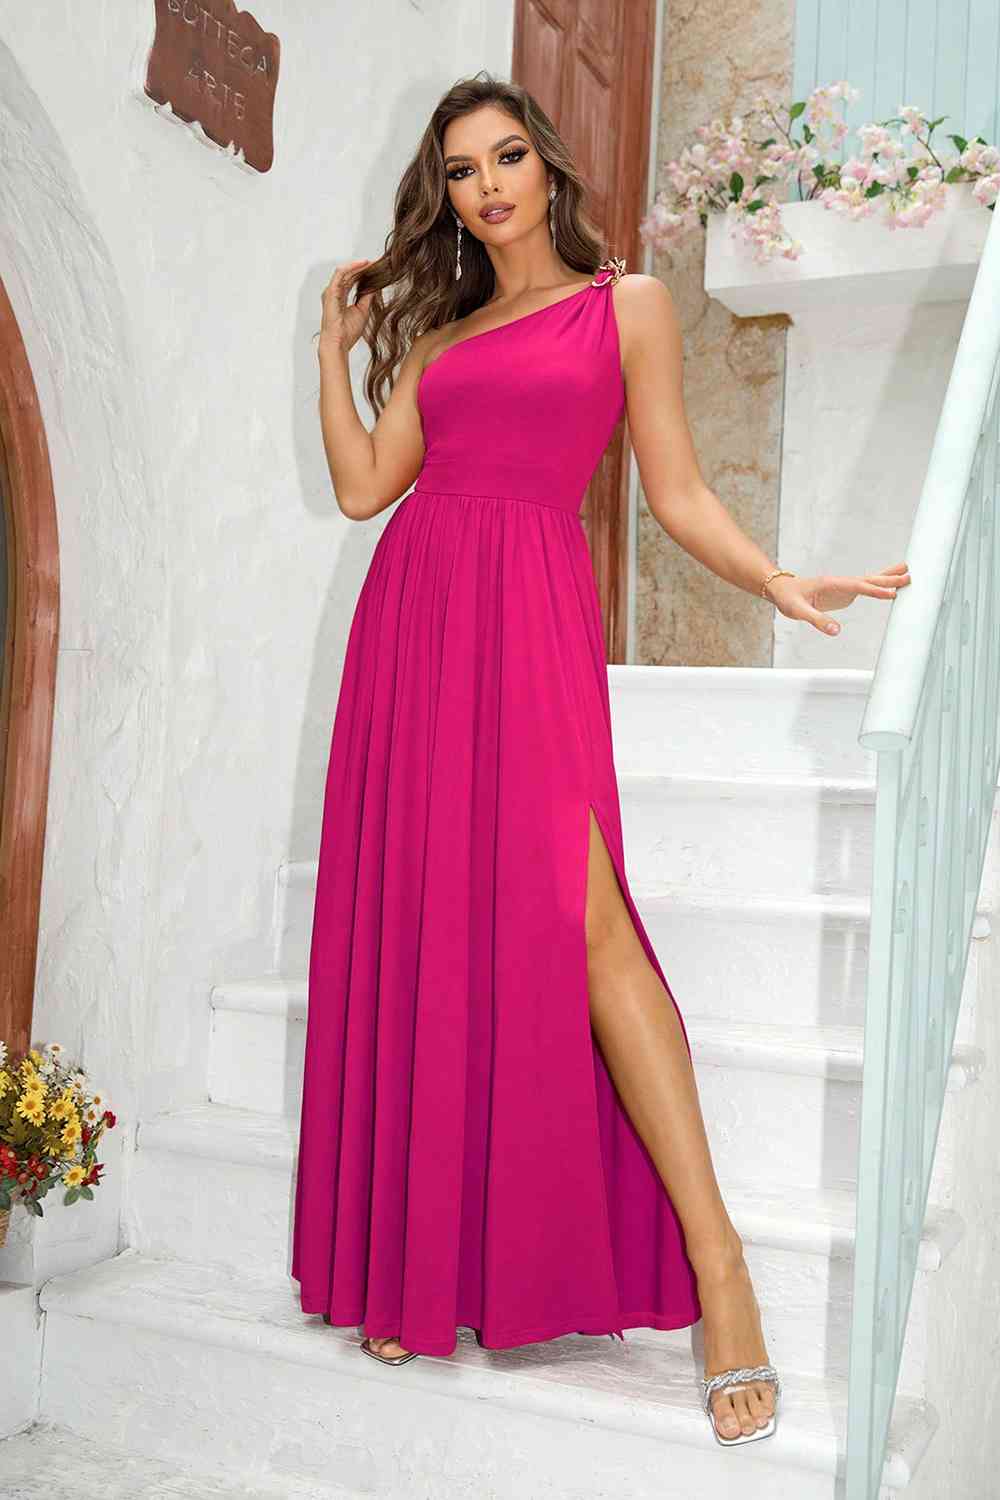 One-Shoulder Split Maxi Dress - Kawaii Stop - Alluring Look, Christmas, Effortless Beauty, Elegant Fashion, Imported Dress, Maxi Dress, One-Shoulder, Ringing-N, Ship From Overseas, Special Occasion, Standout Elegance, Stretchy Fabric, Sultry Style, Thigh-High Split, Women's Clothing